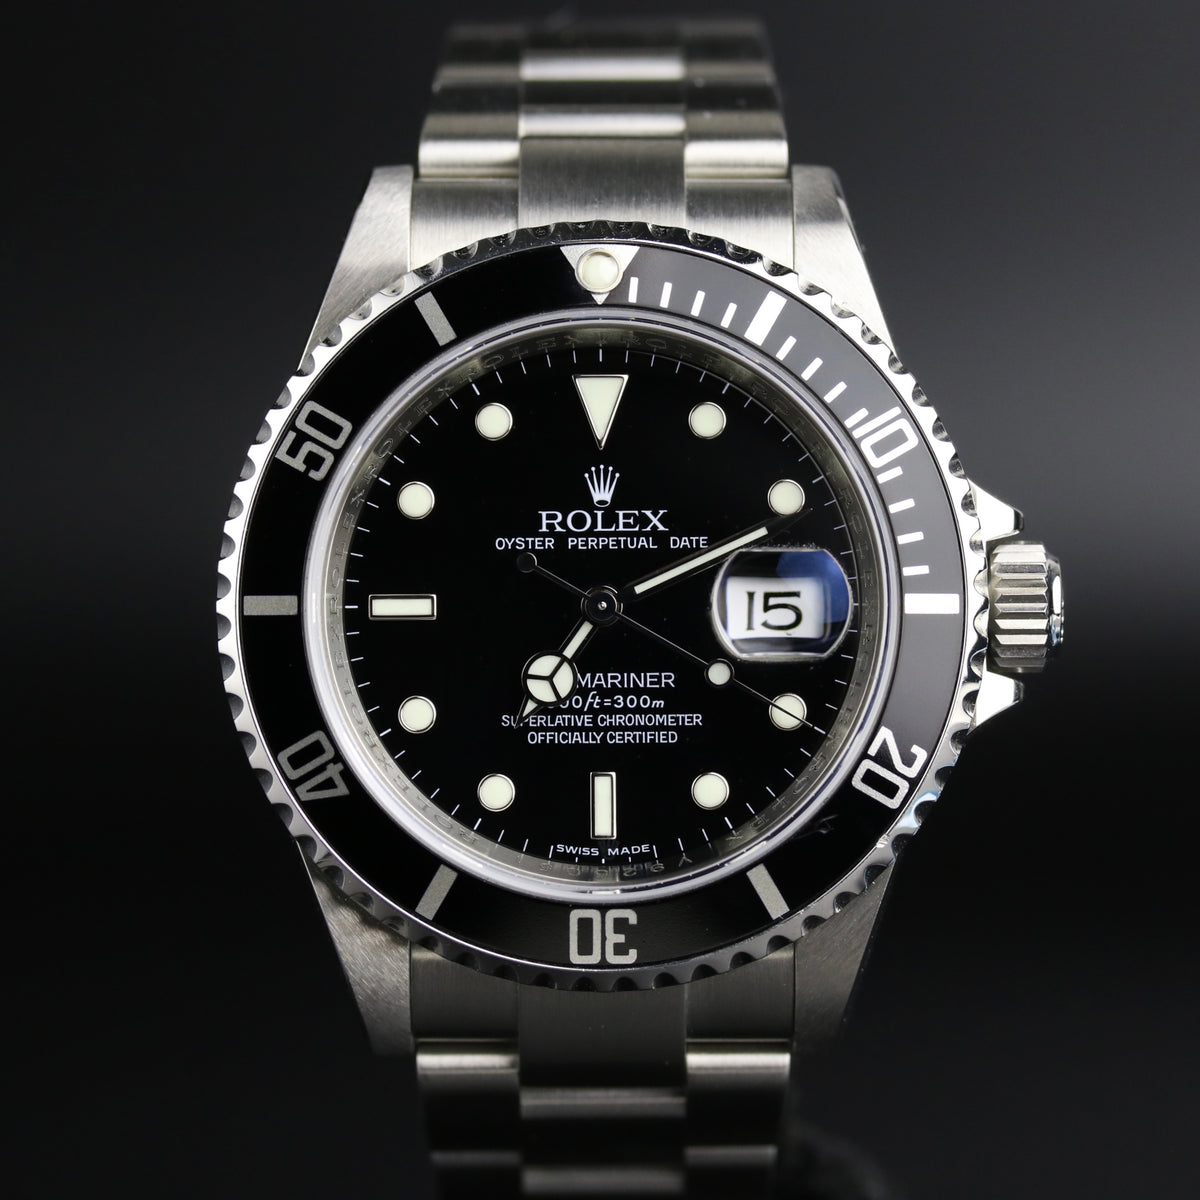 2008 Rolex 16610 Submariner Inner Bezel Engraved with Box & Papers